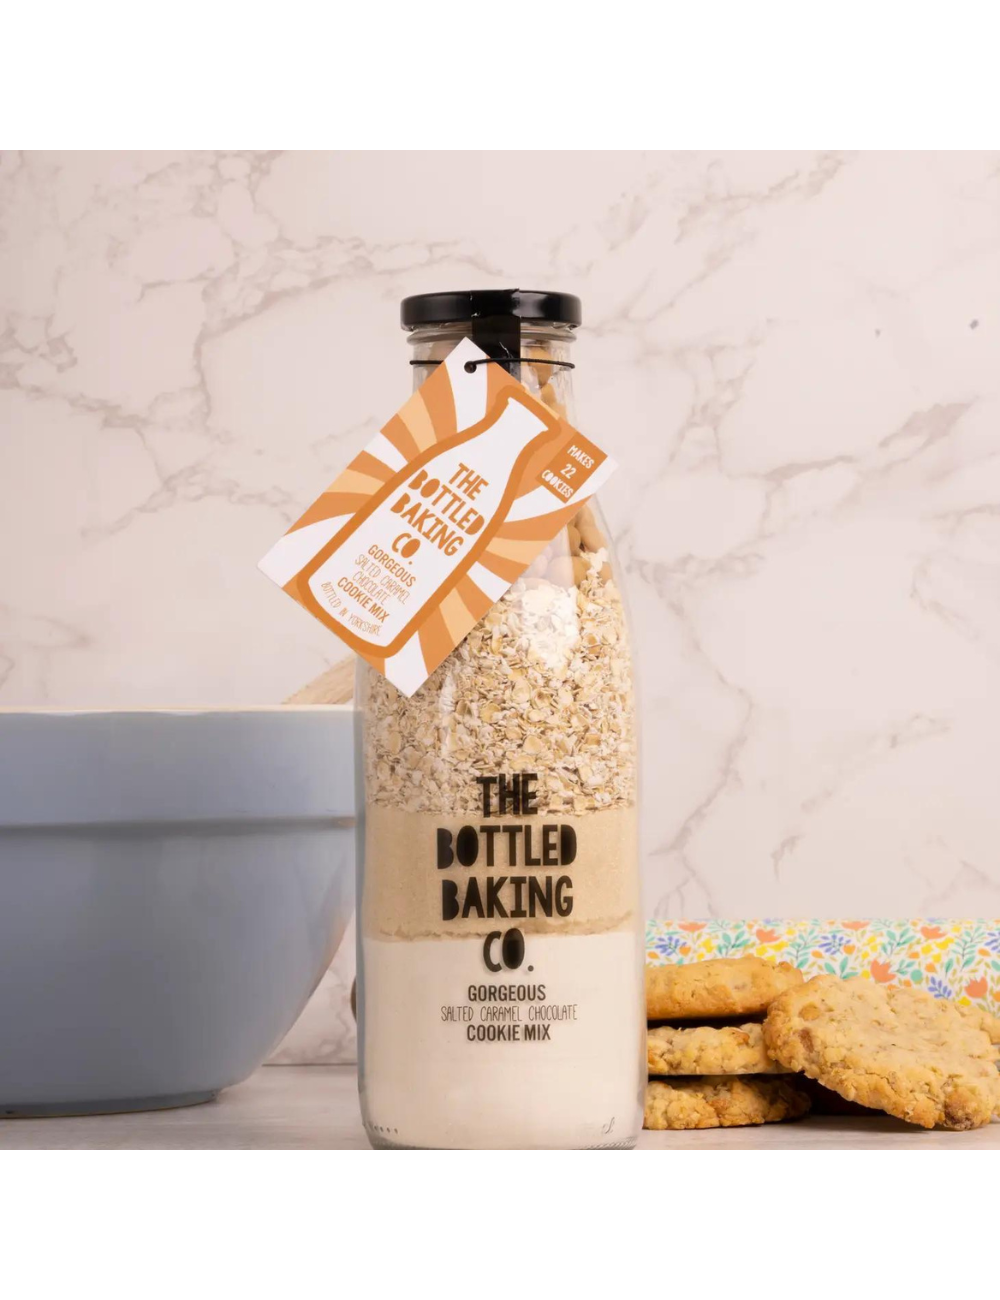 Salted Caramel Cookie Mix in a Bottle